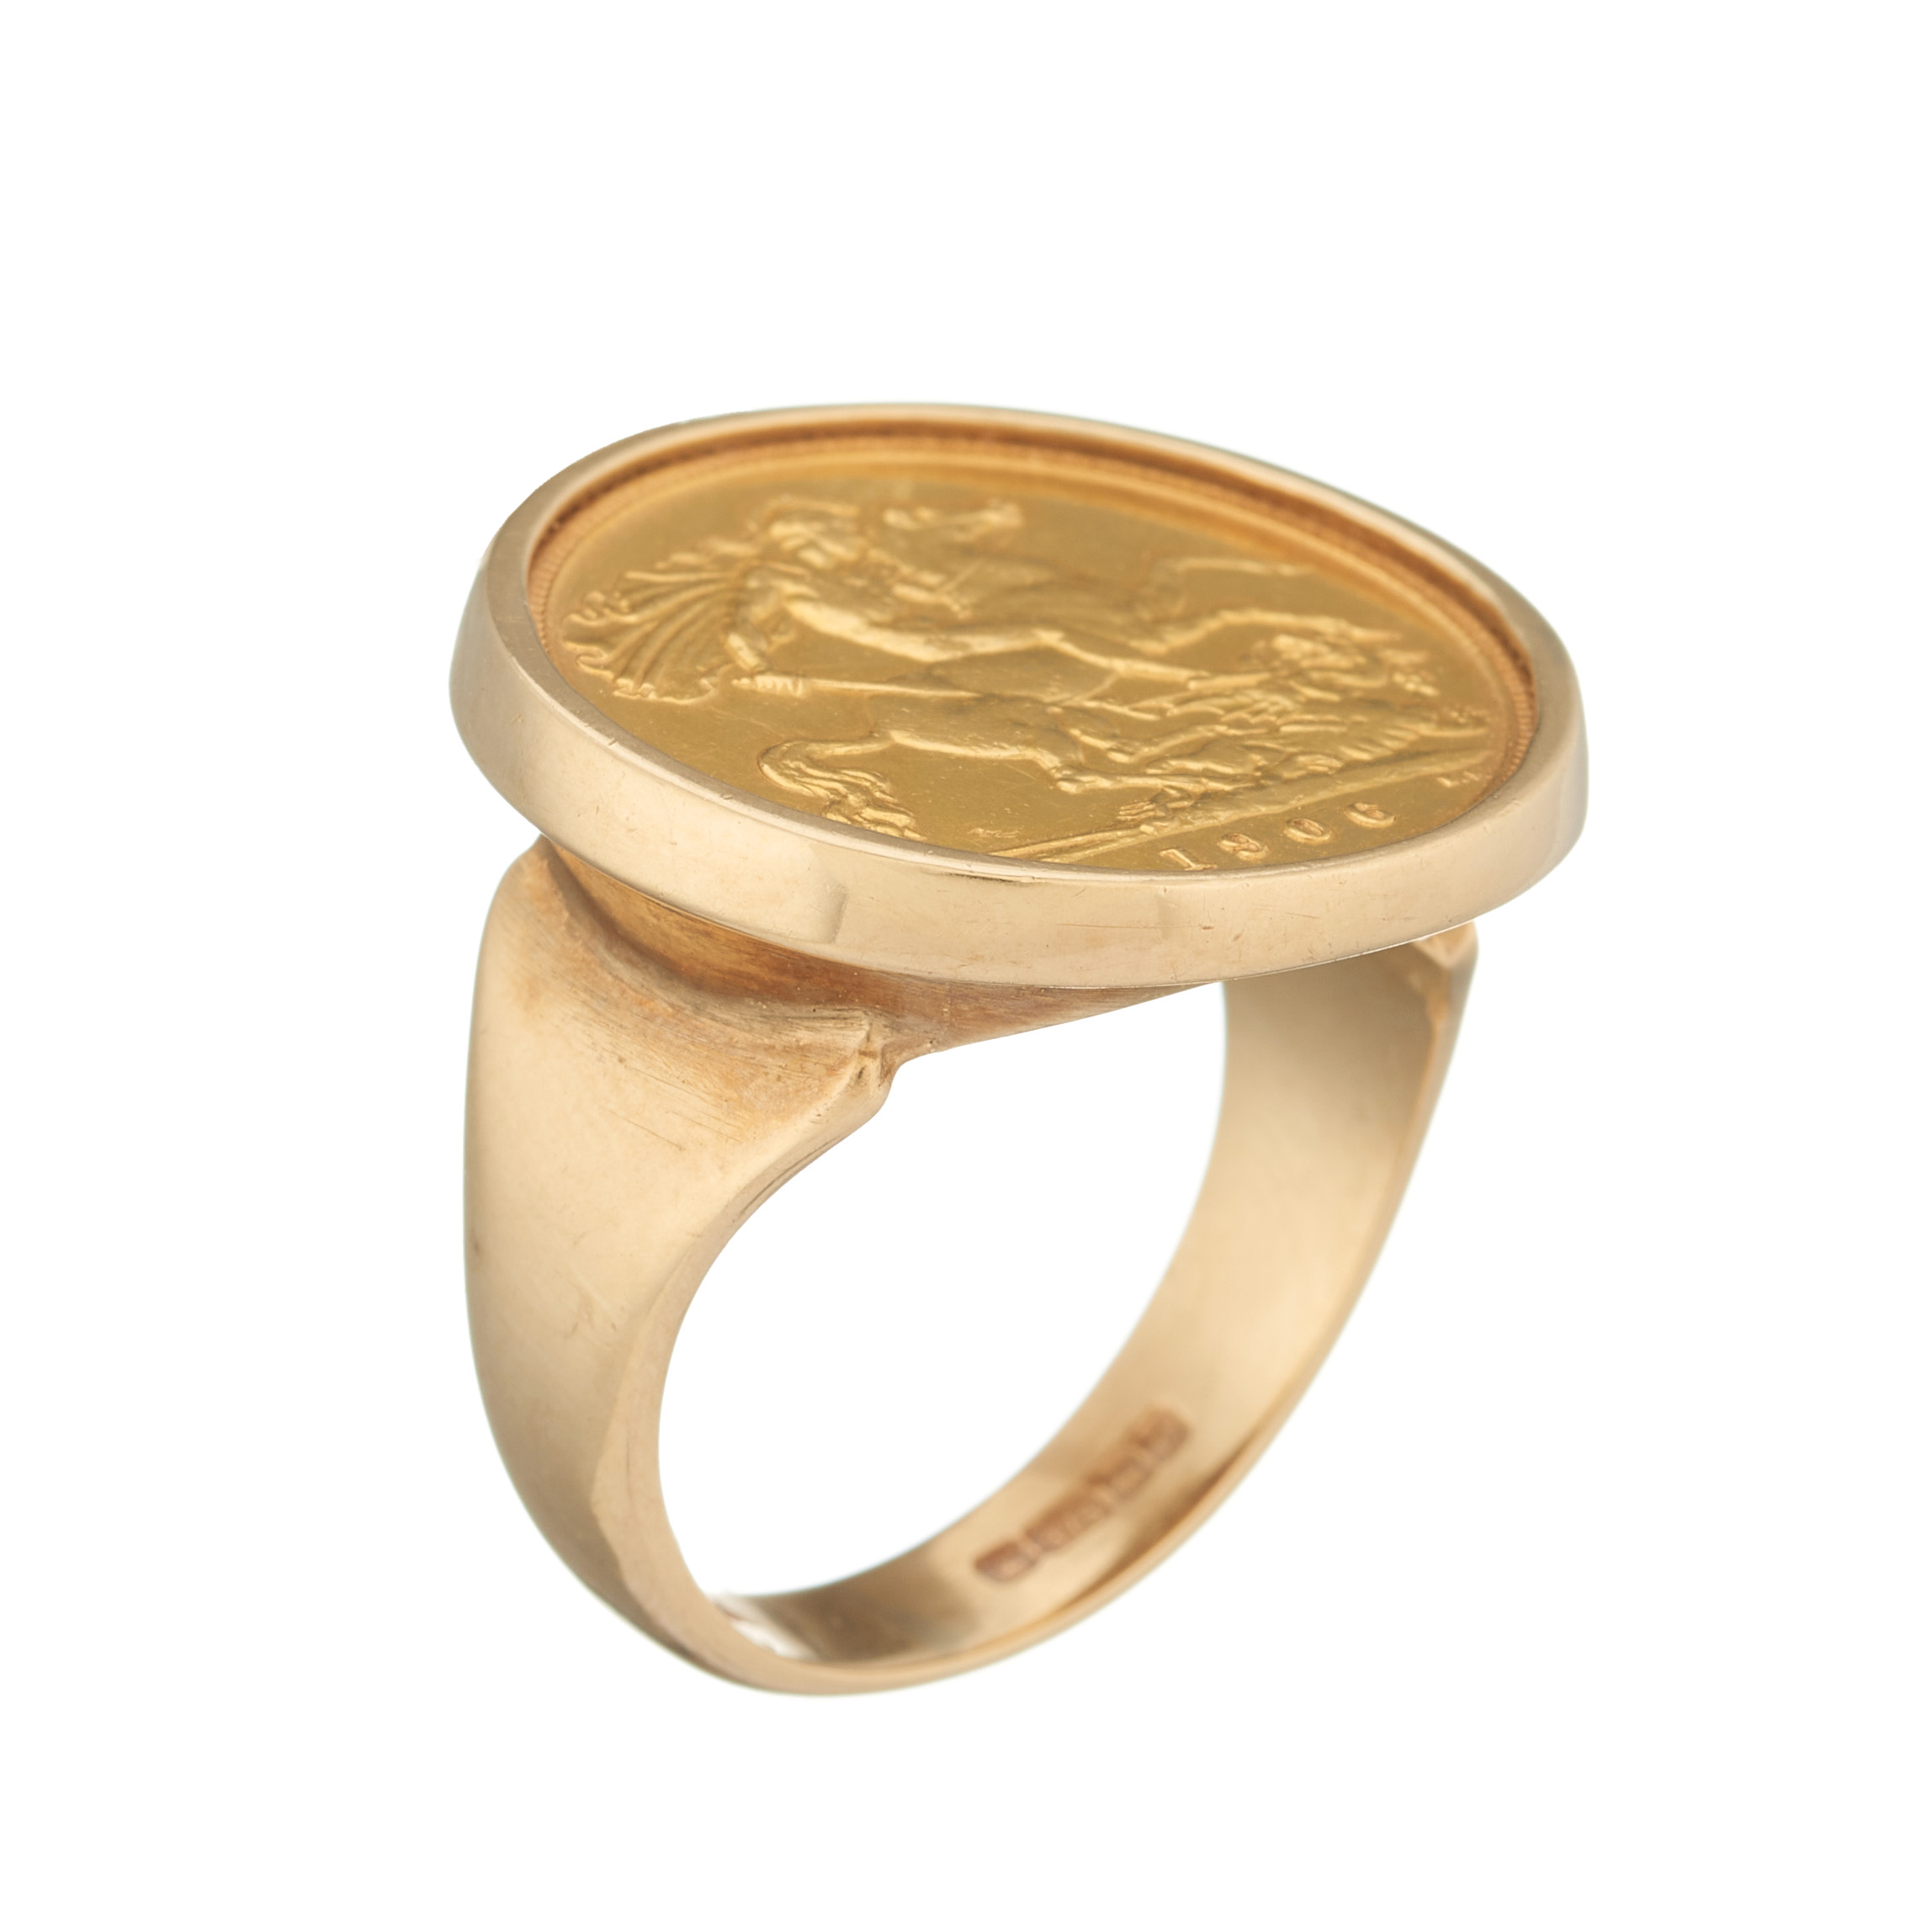 A 9ct gold half sovereign coin ring - Image 2 of 2